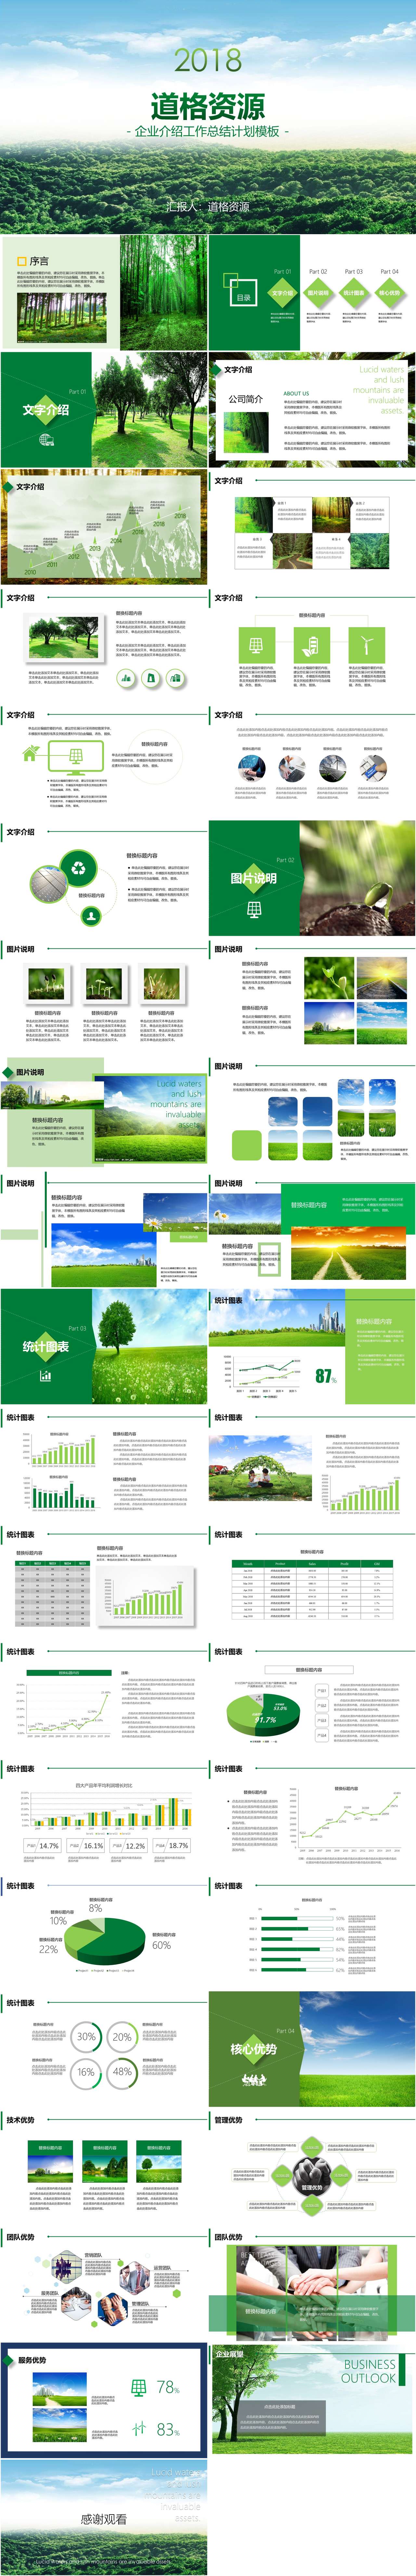 green-simple-environmental-protection-business-plan-ppt-template